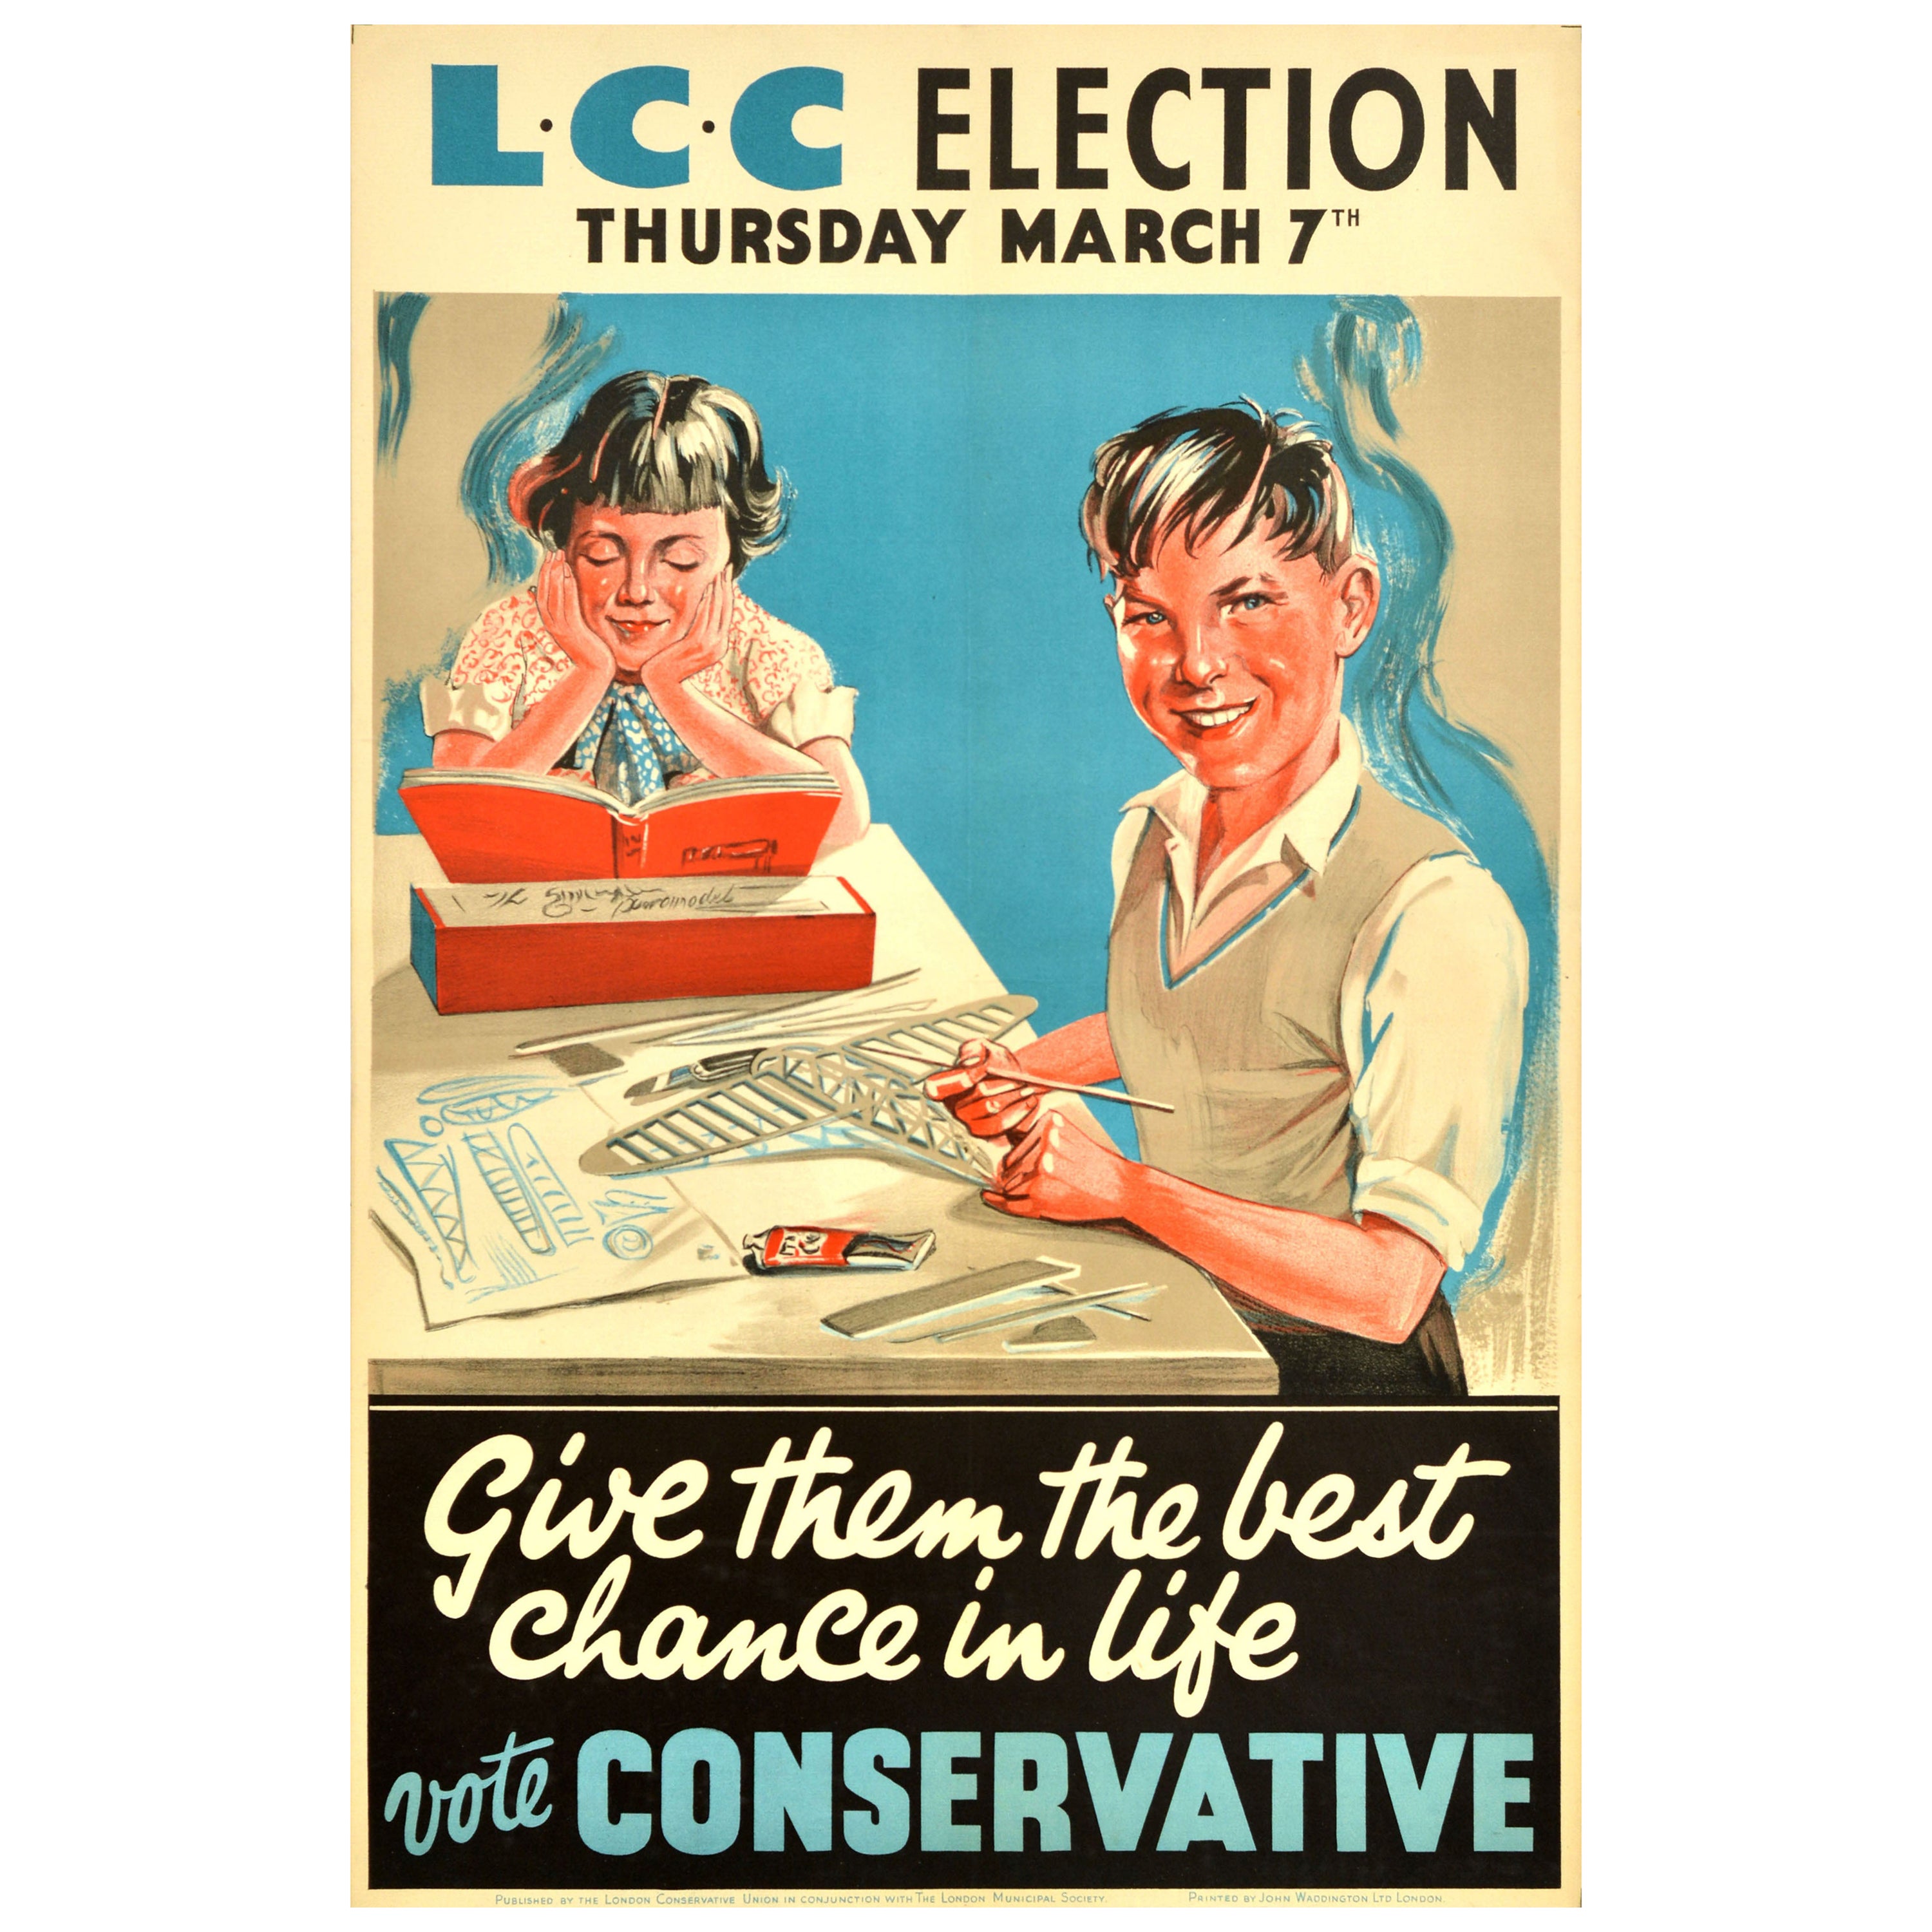 Original Vintage County Council Poster Election Give Best Chance In Life